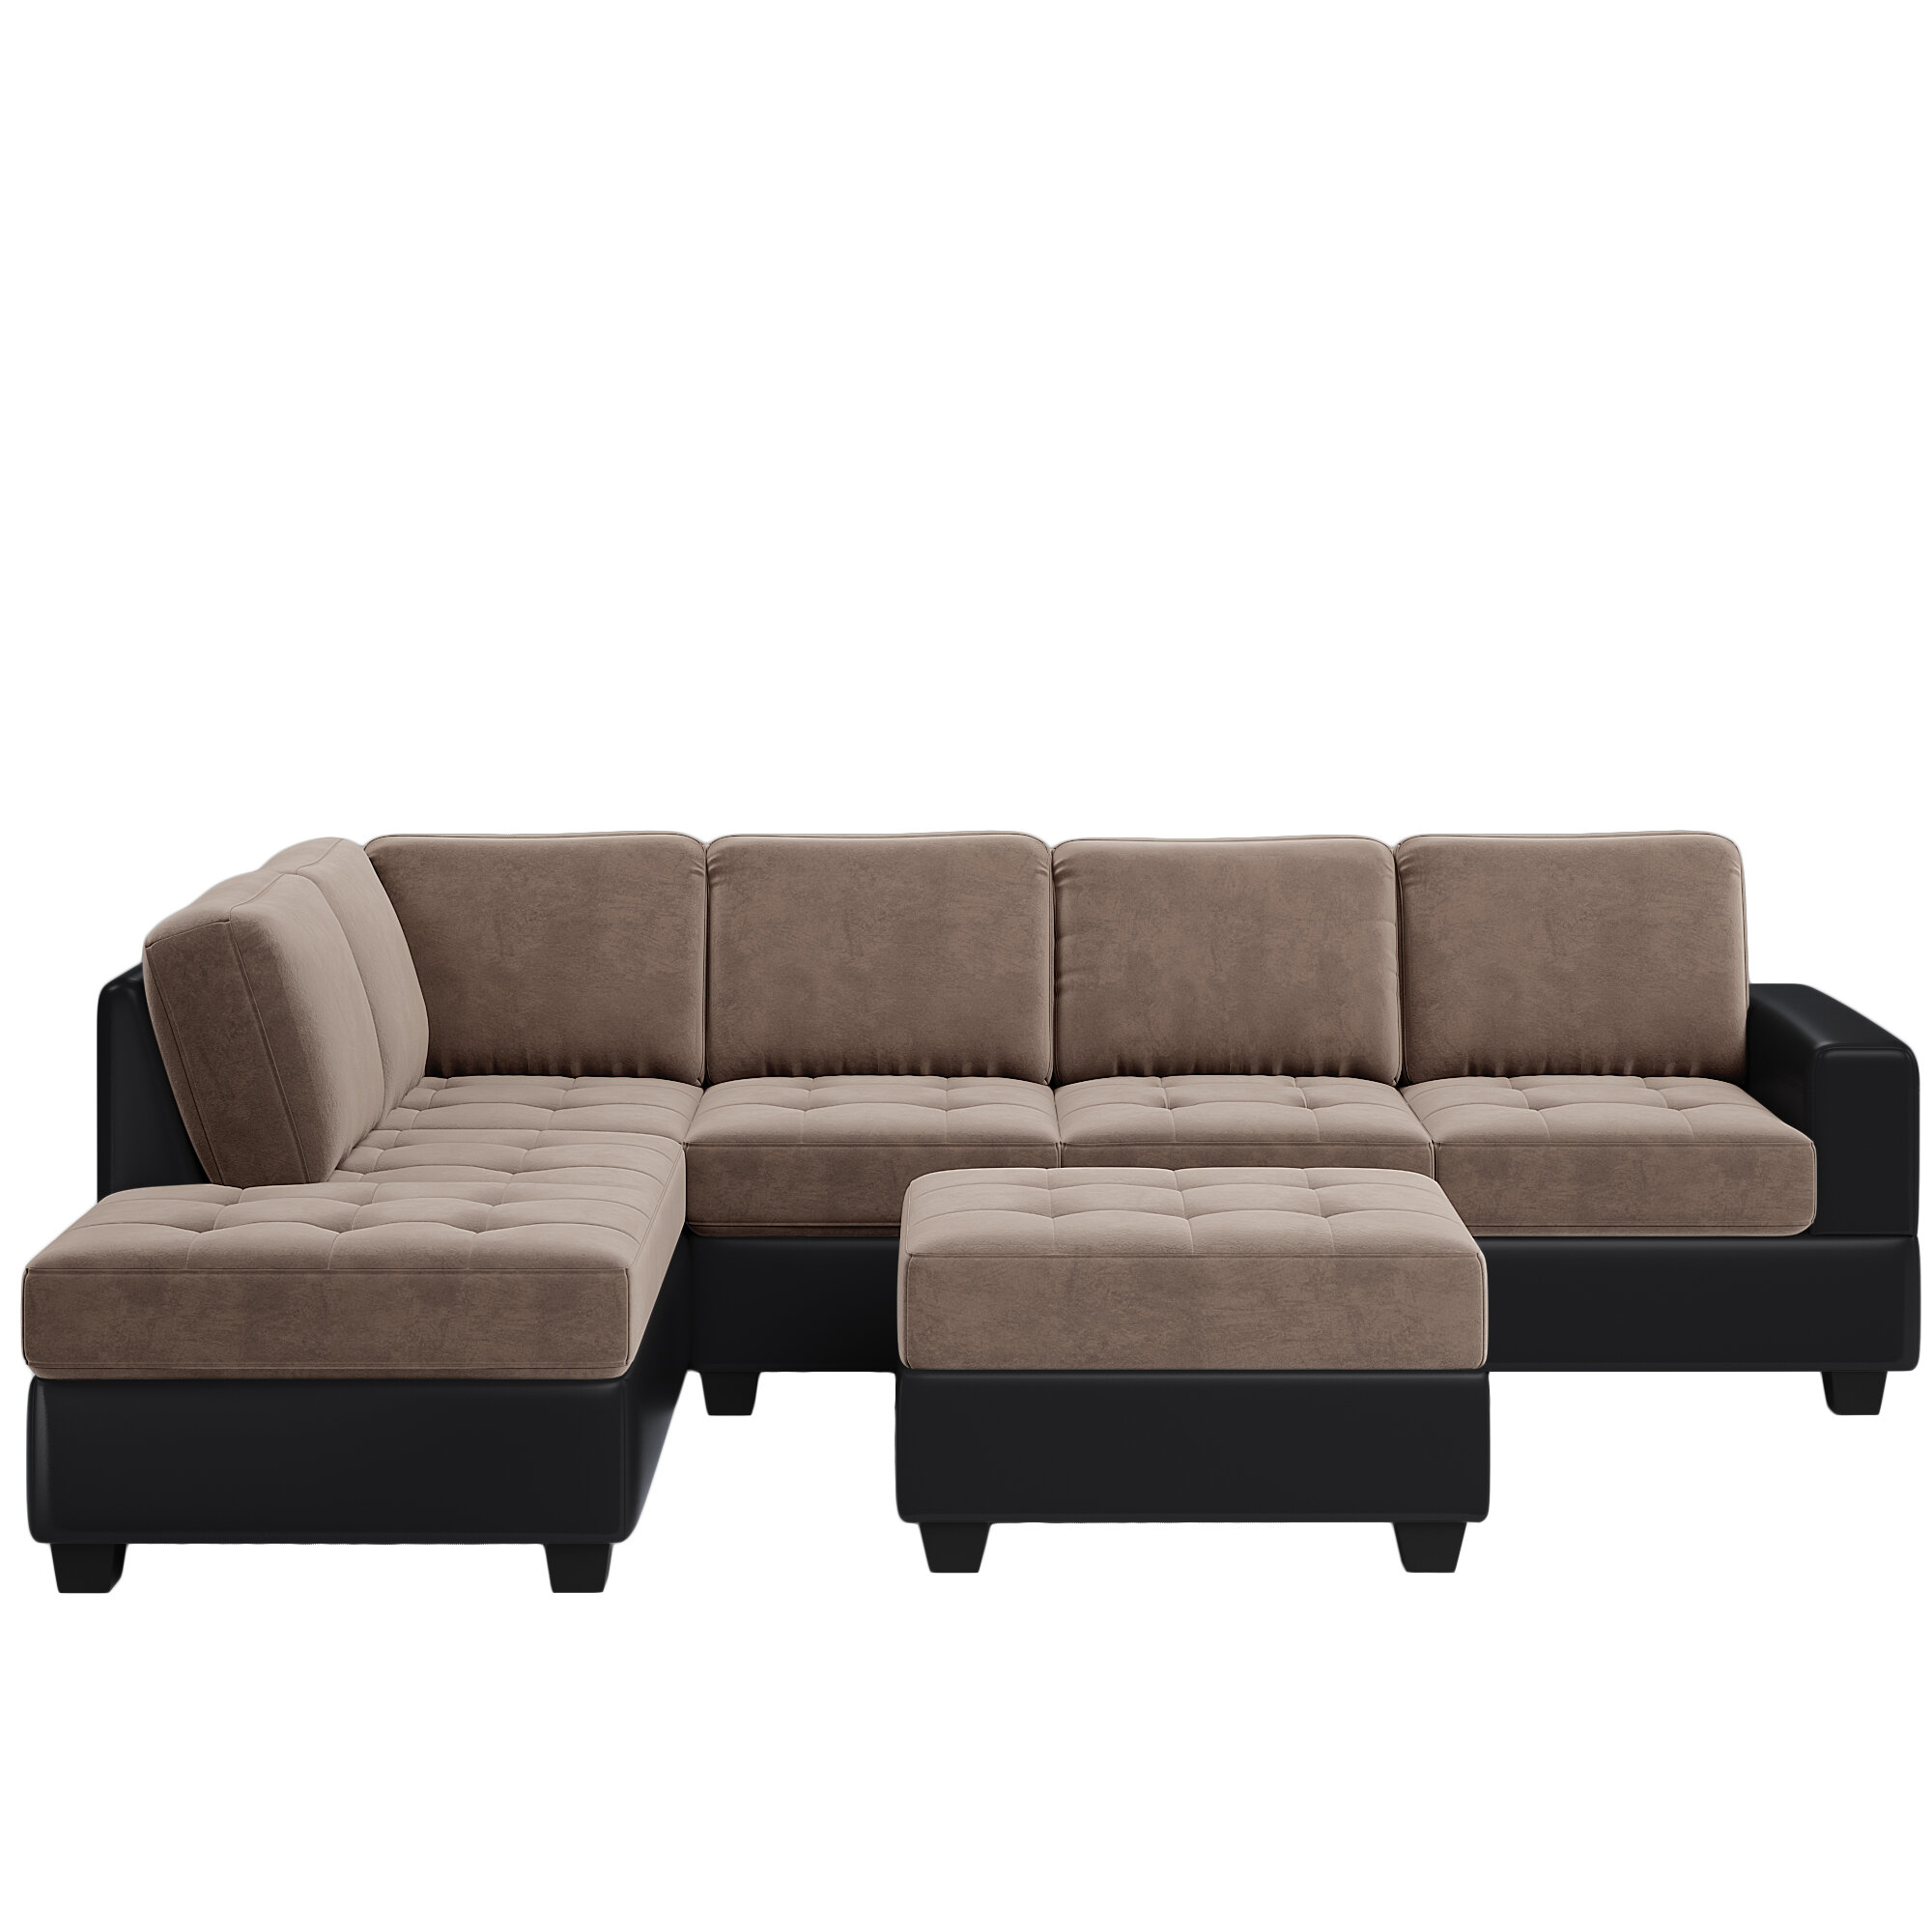 Modular Sofa Set Sectional Sofa L-Shaped Convertible Sofa Tufted Sofa with Ottoman 52 Inch Loveseat Sofa with Reversible Ottoman Fabric Upholstered Tufted Sofa for Living Room Small Spaces Grey